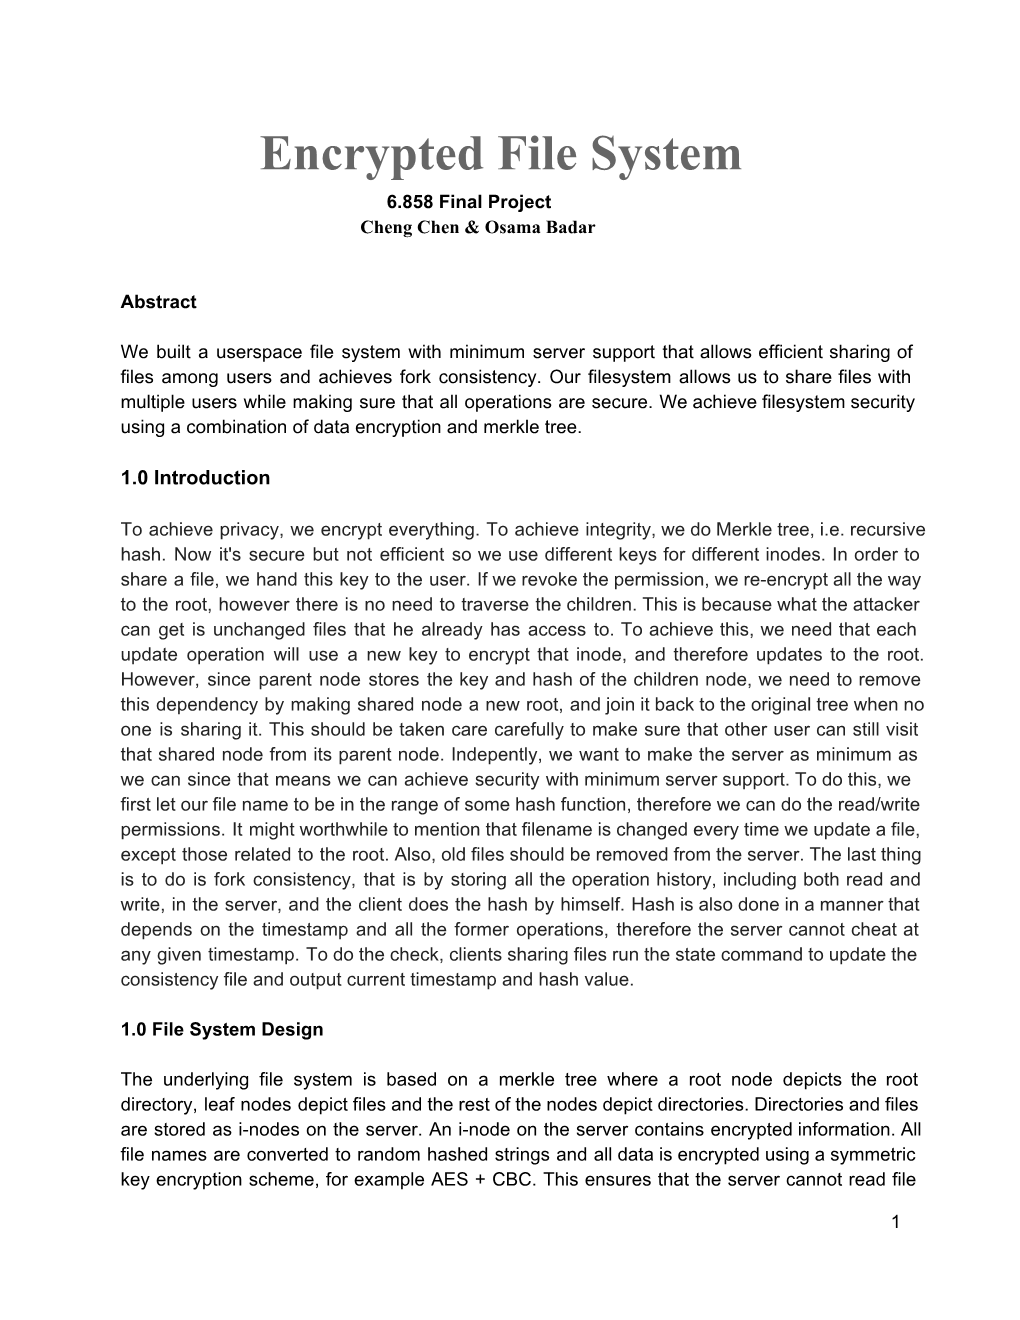 Encrypted File System 6.858 Final Project Cheng Chen & Osama Badar